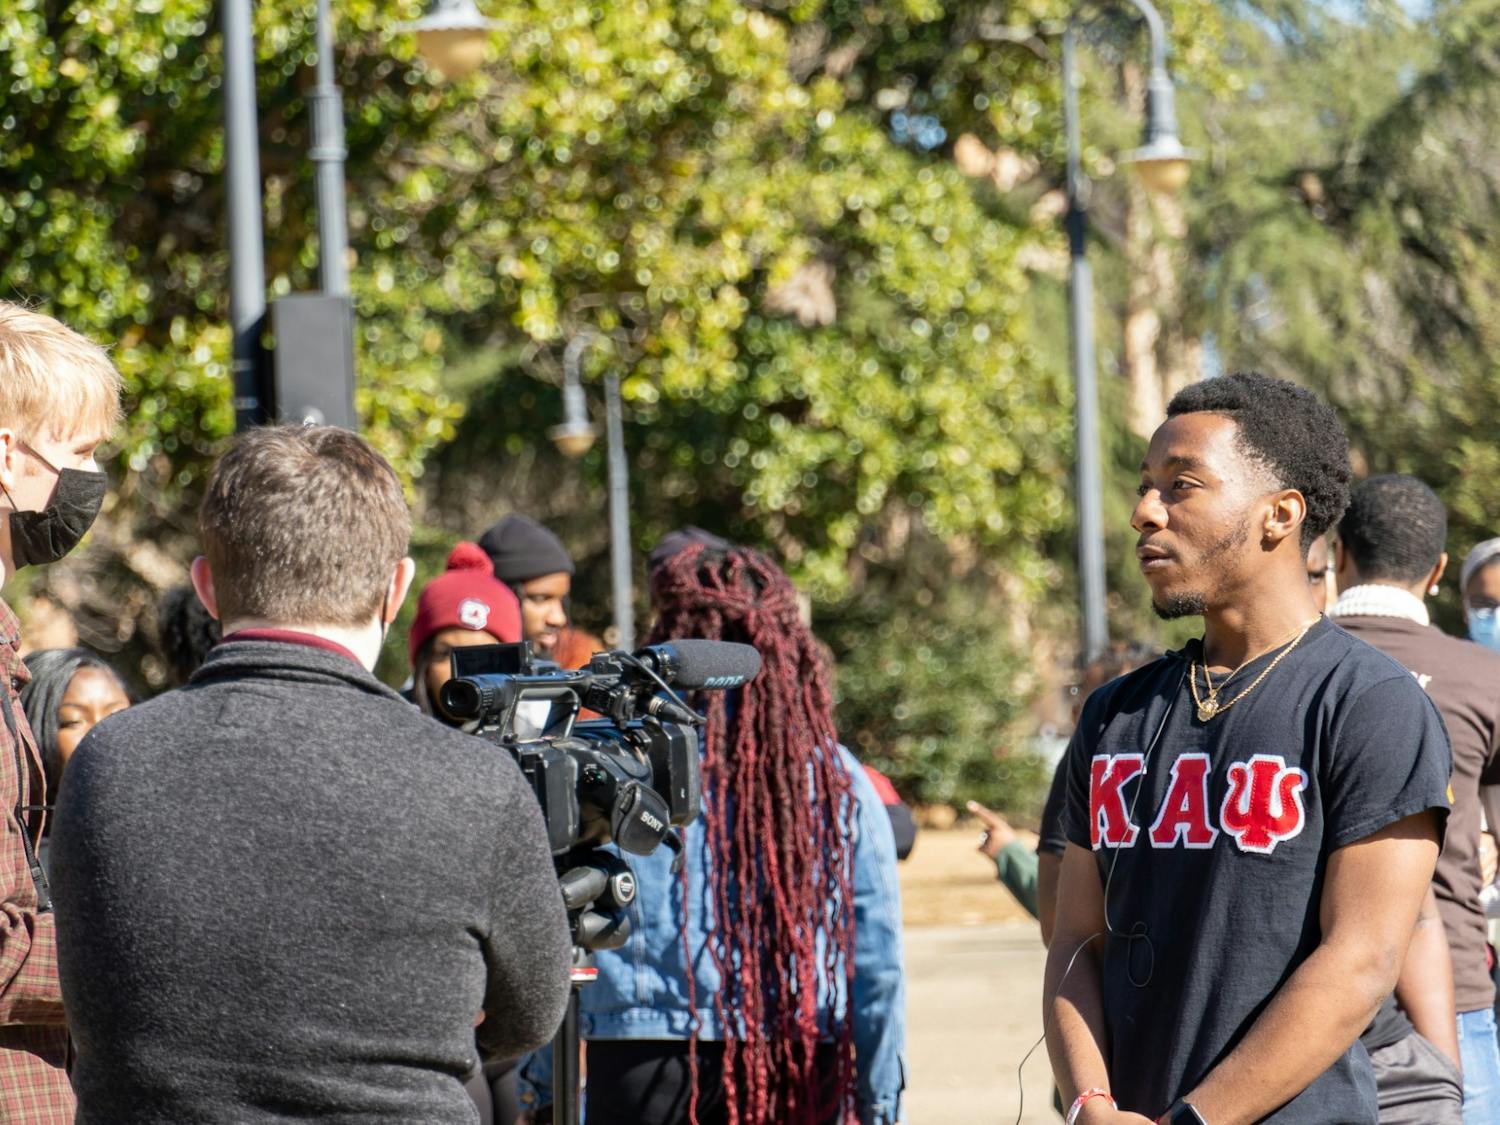 After the protest ended, members of the USC NAACP chapter as well as the students and community members who took part in the protest participated in interviews carried out by various media groups including The Daily Gamecock and SGTV.